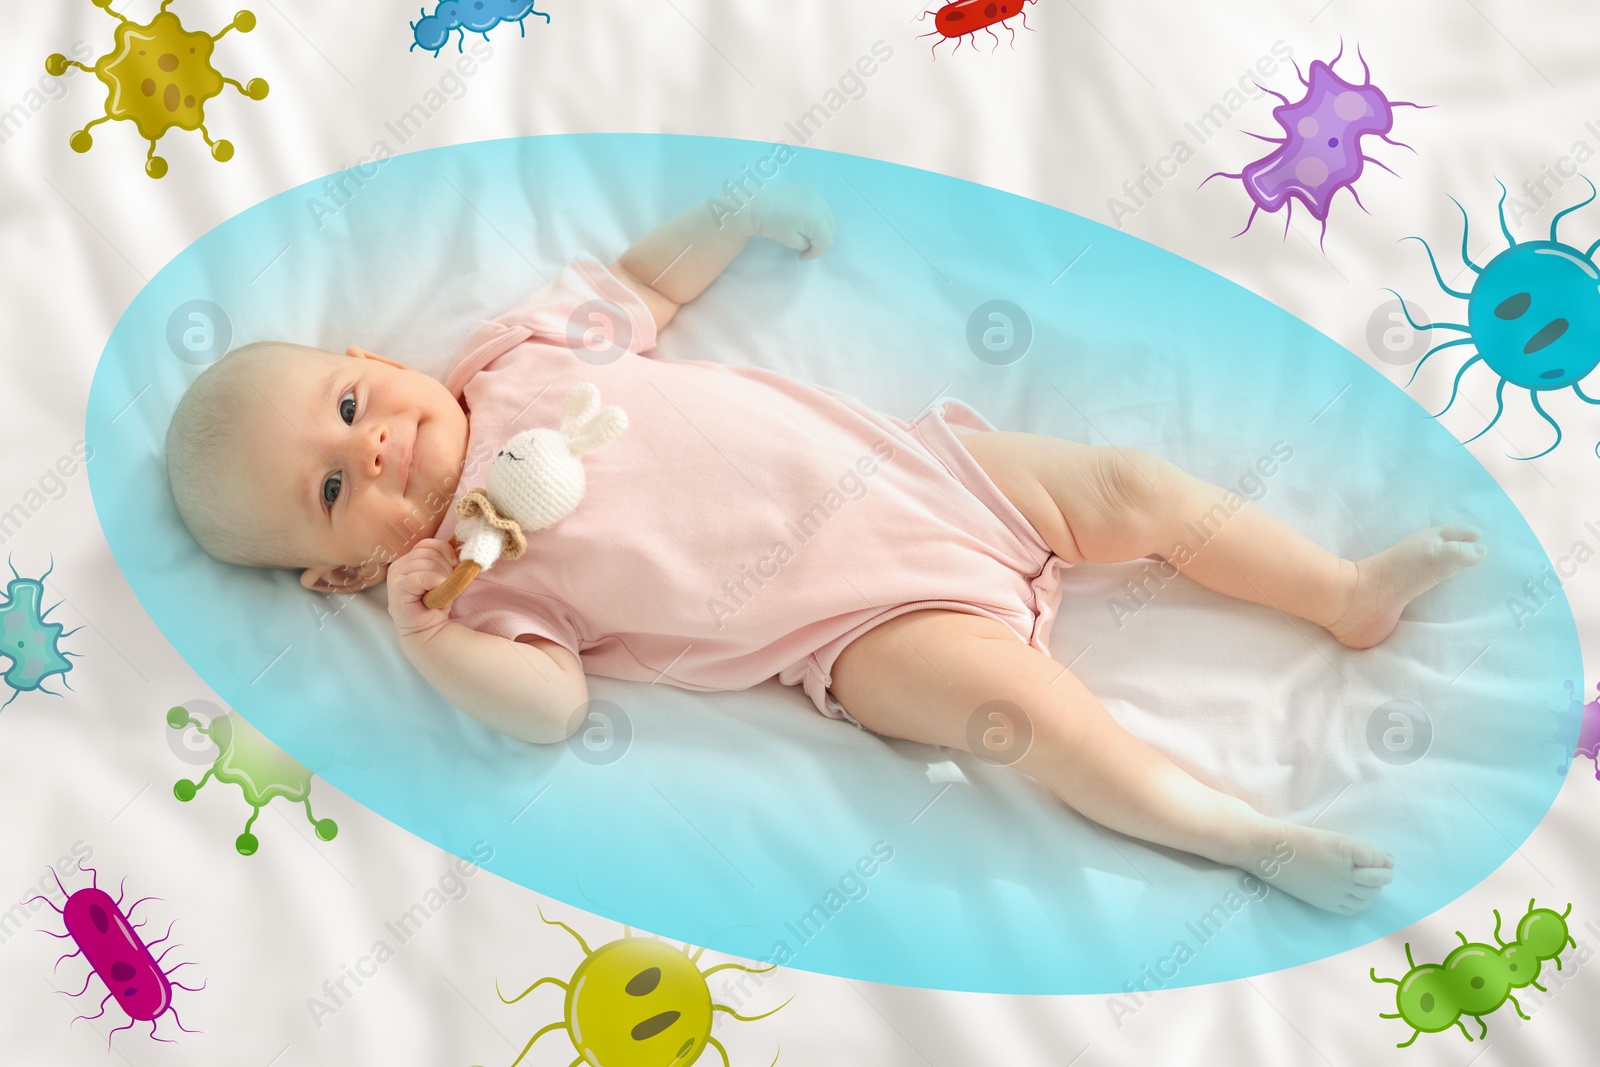 Illustration of Cute little baby with strong immunity on bed. Bubble around child symbolizing shield against viruses, illustration